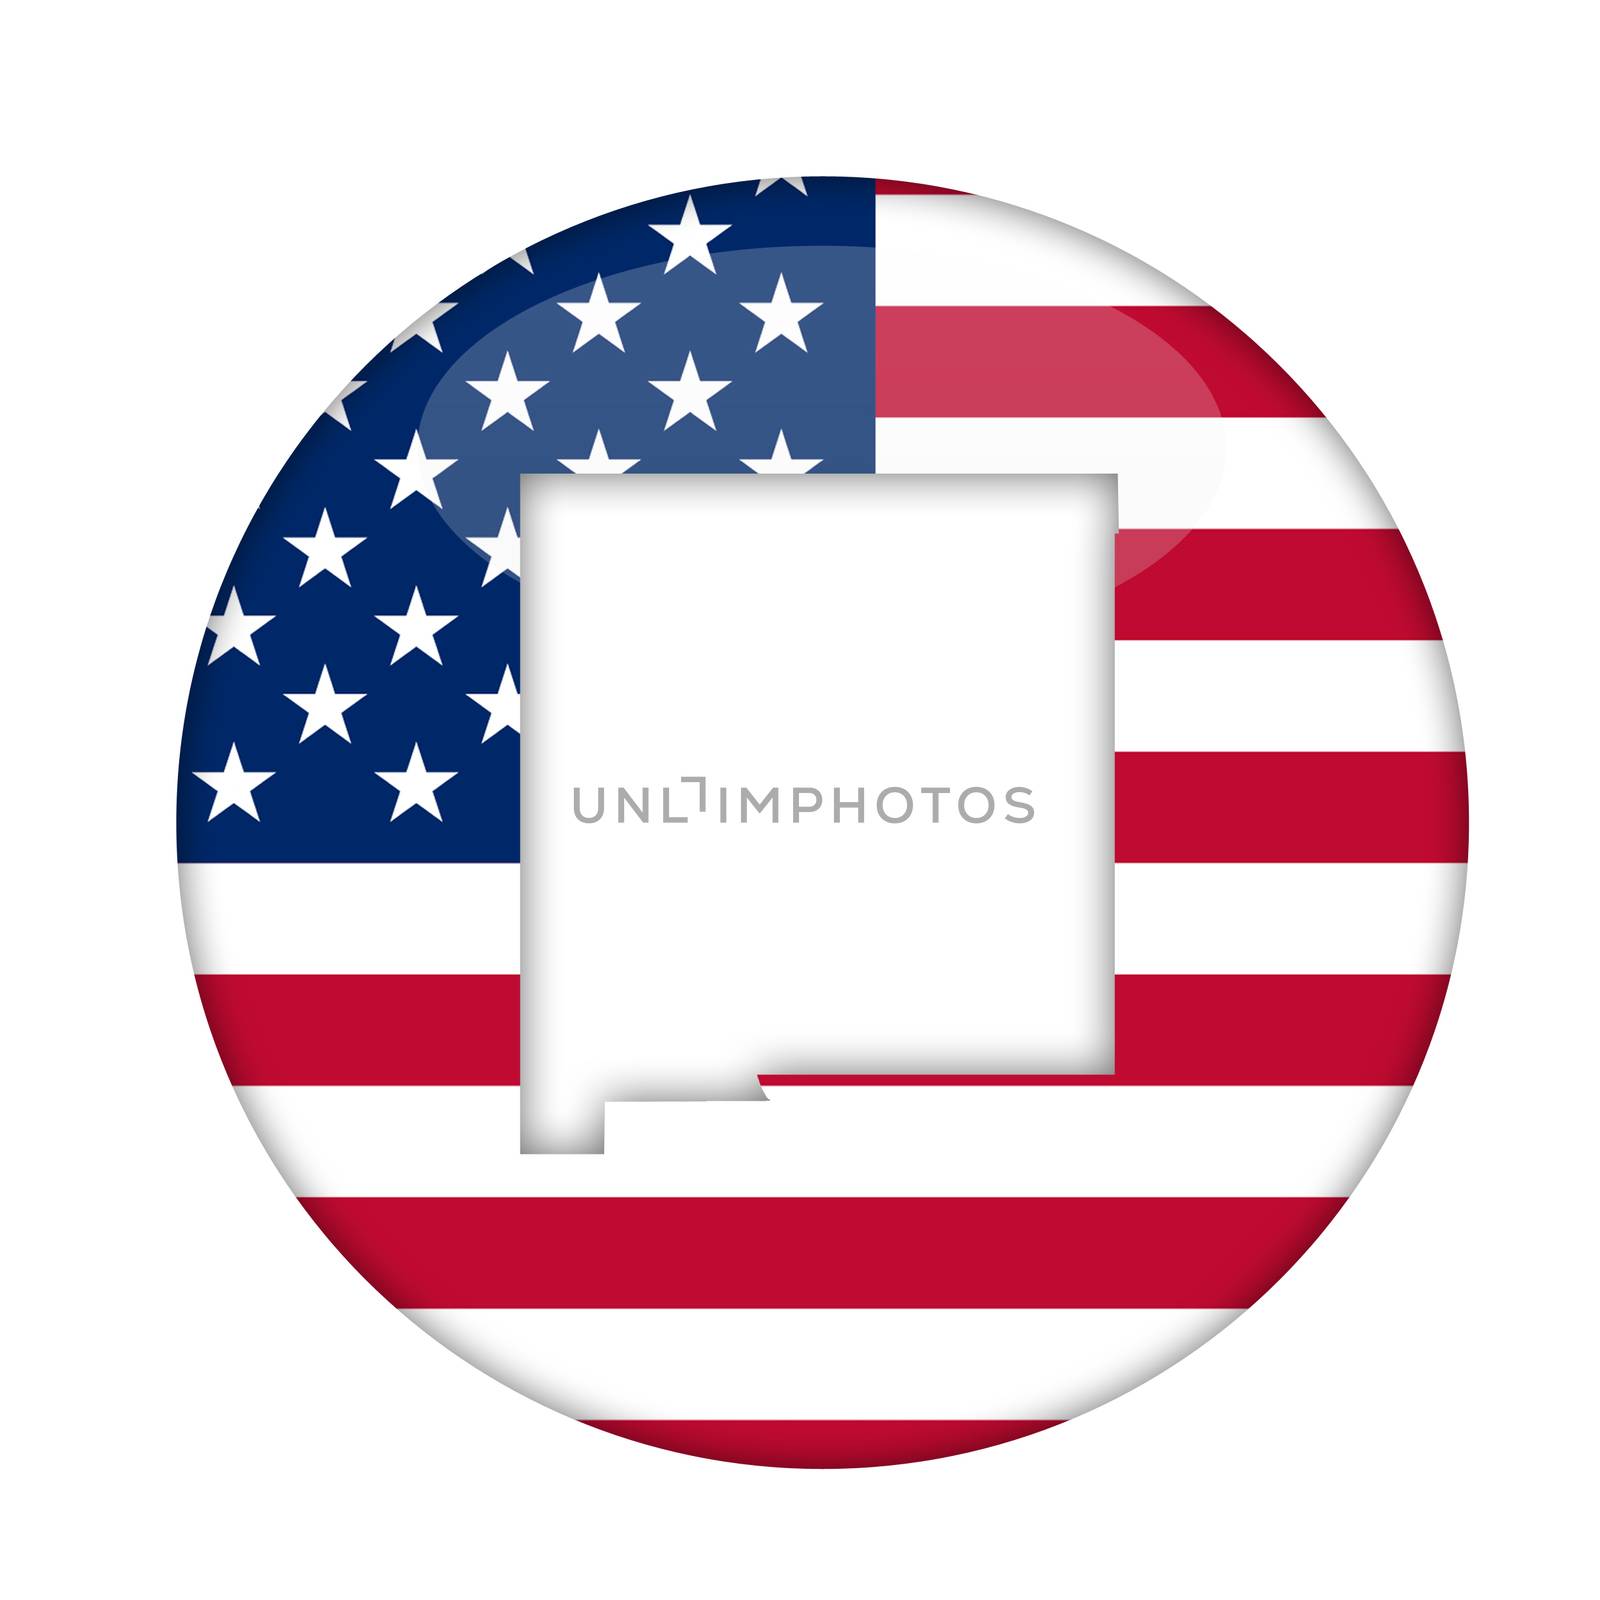 New Mexico state of America badge isolated on a white background.